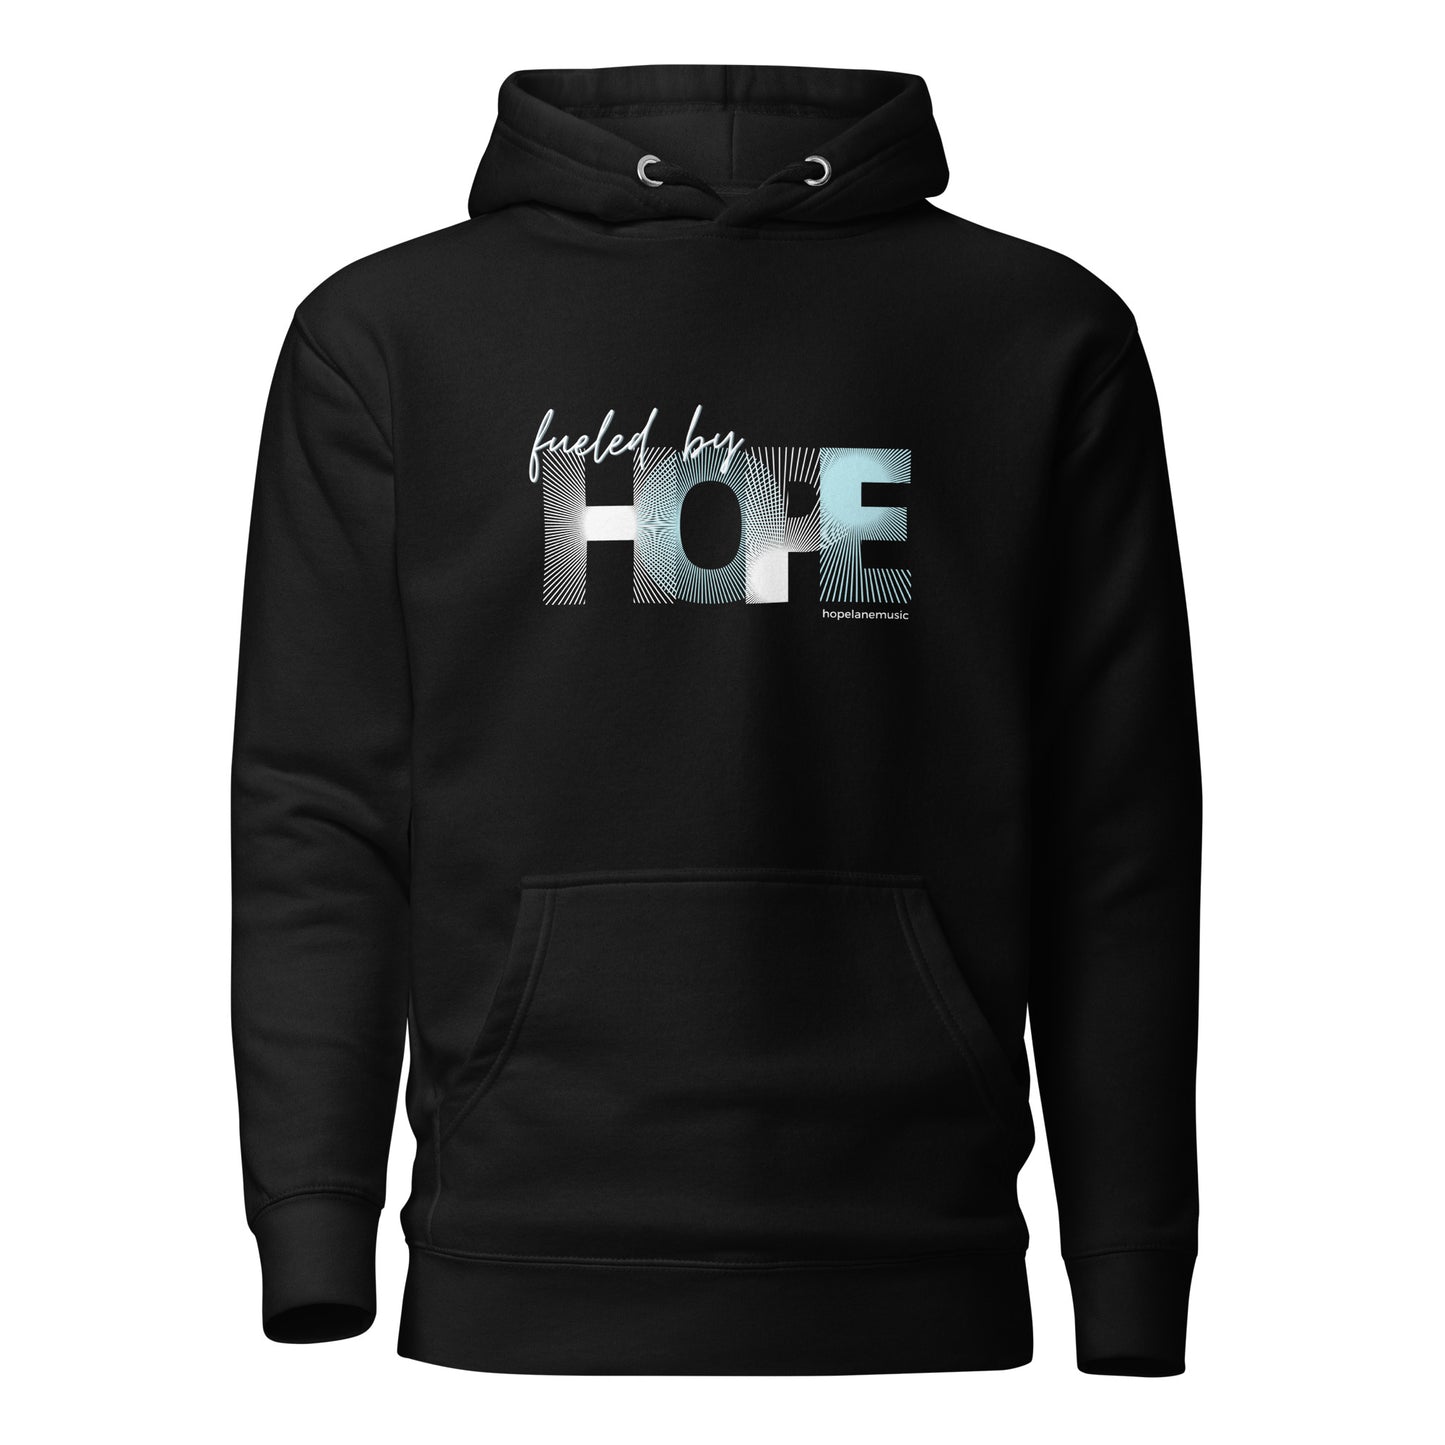 'Fueled by Hope' Unisex Hoodie (official Hope Lane Merch)